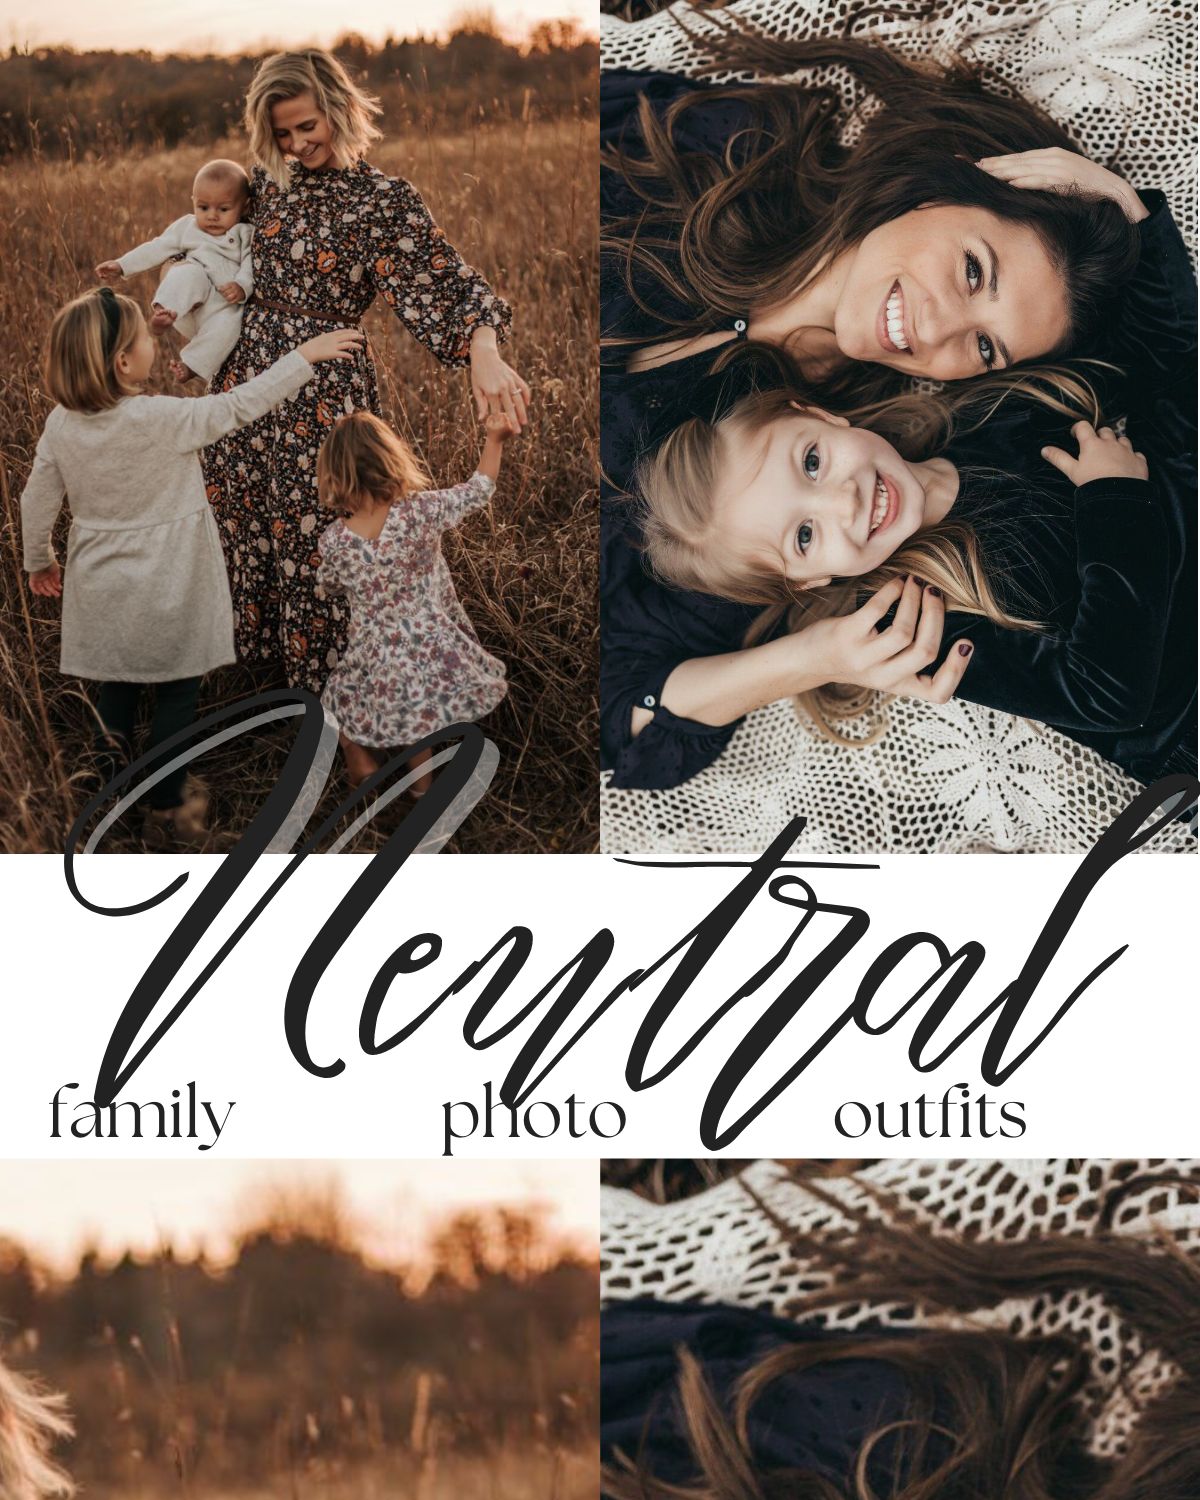 Neutral outfit ideas for moms & kids photos